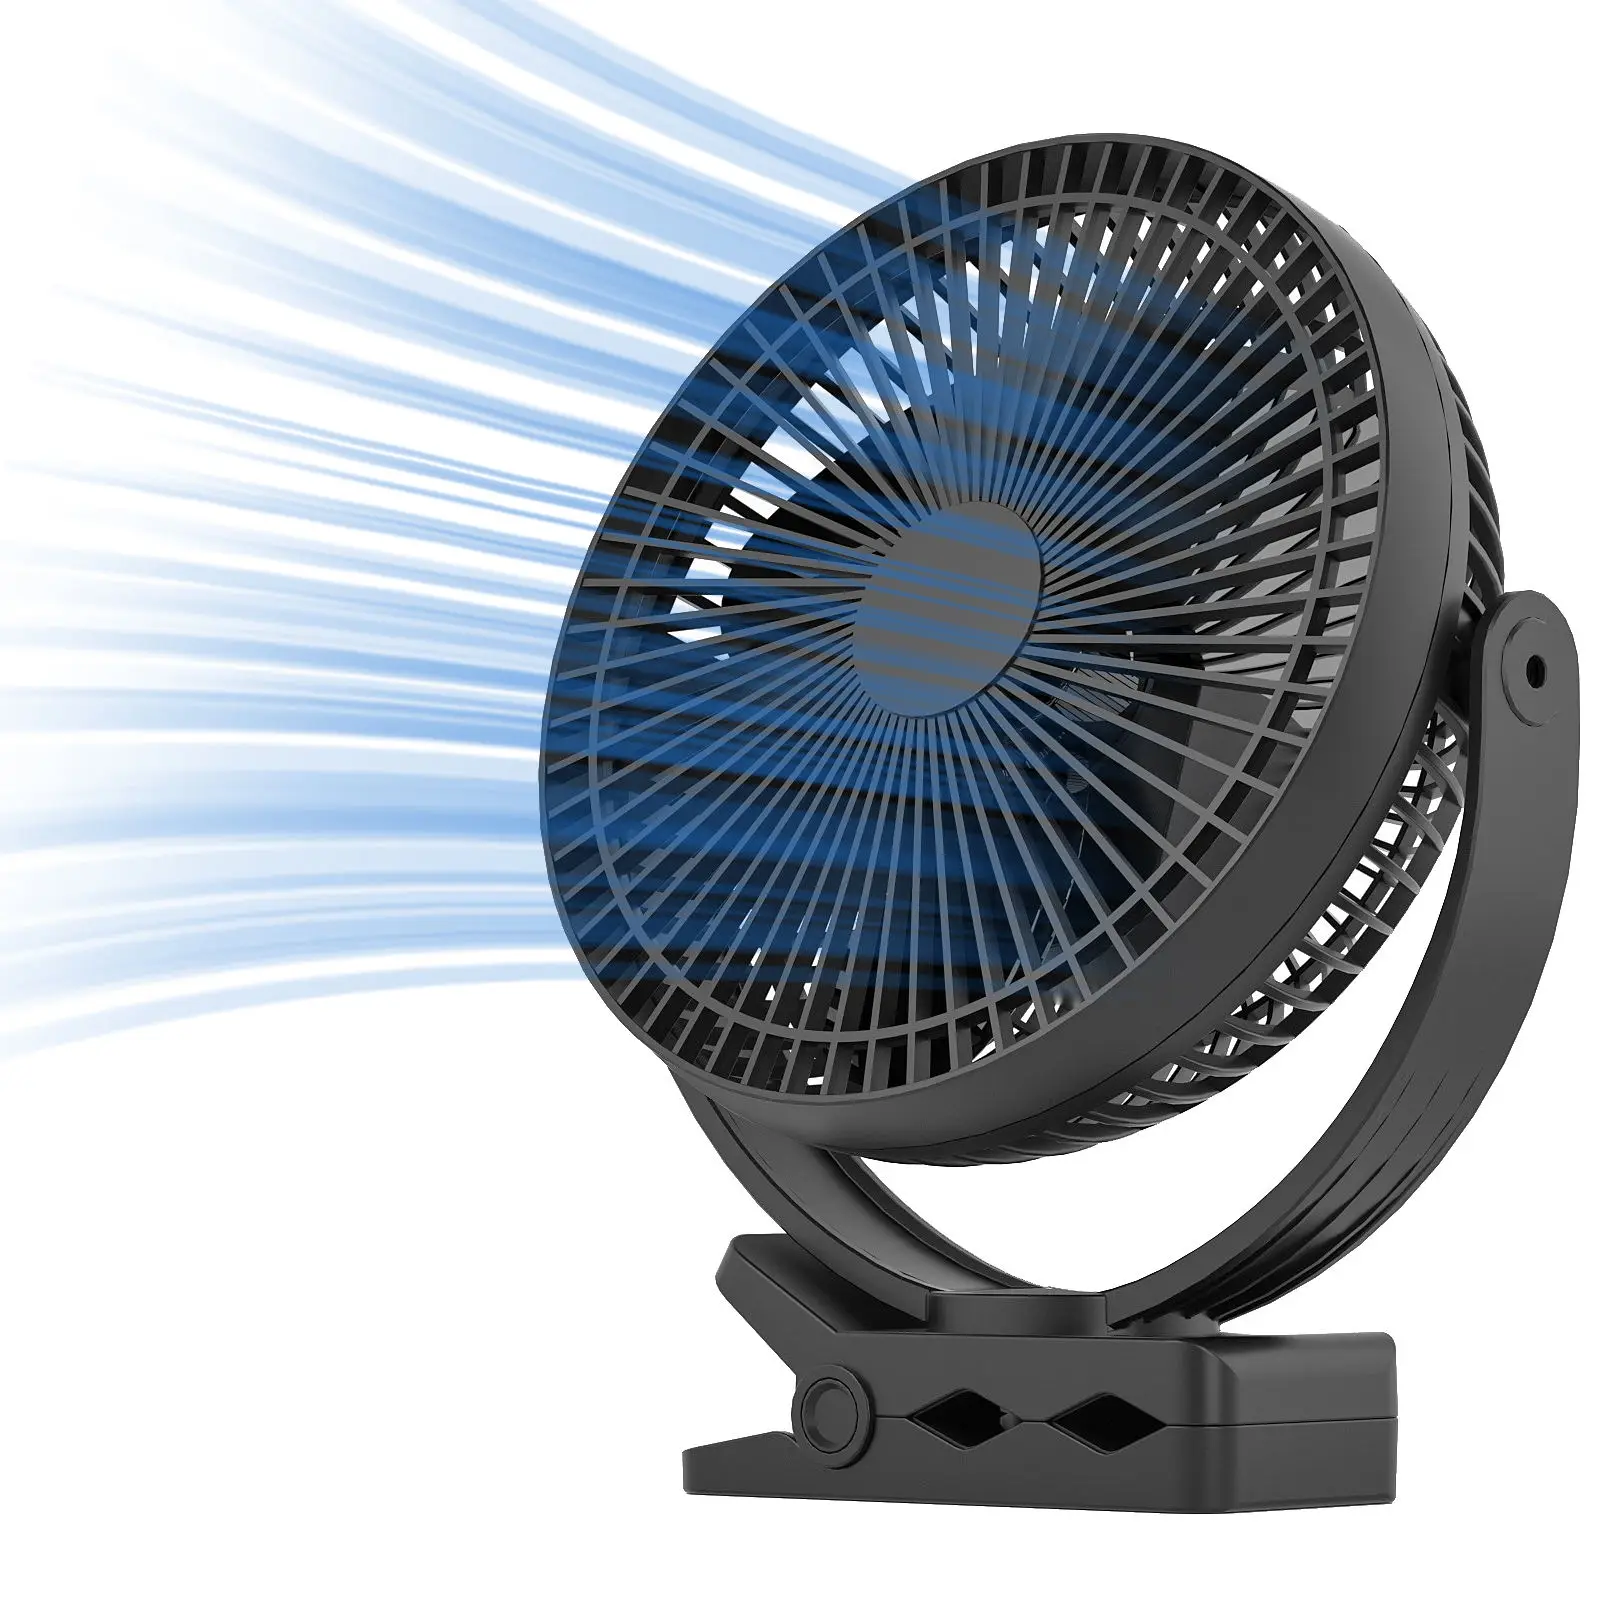 

Mini 10000mAh Chargeable Clipped Fan 360° Rotation 4-speed Wind USB Desktop Ventilator Silent Air Conditioner for Bedroom Office